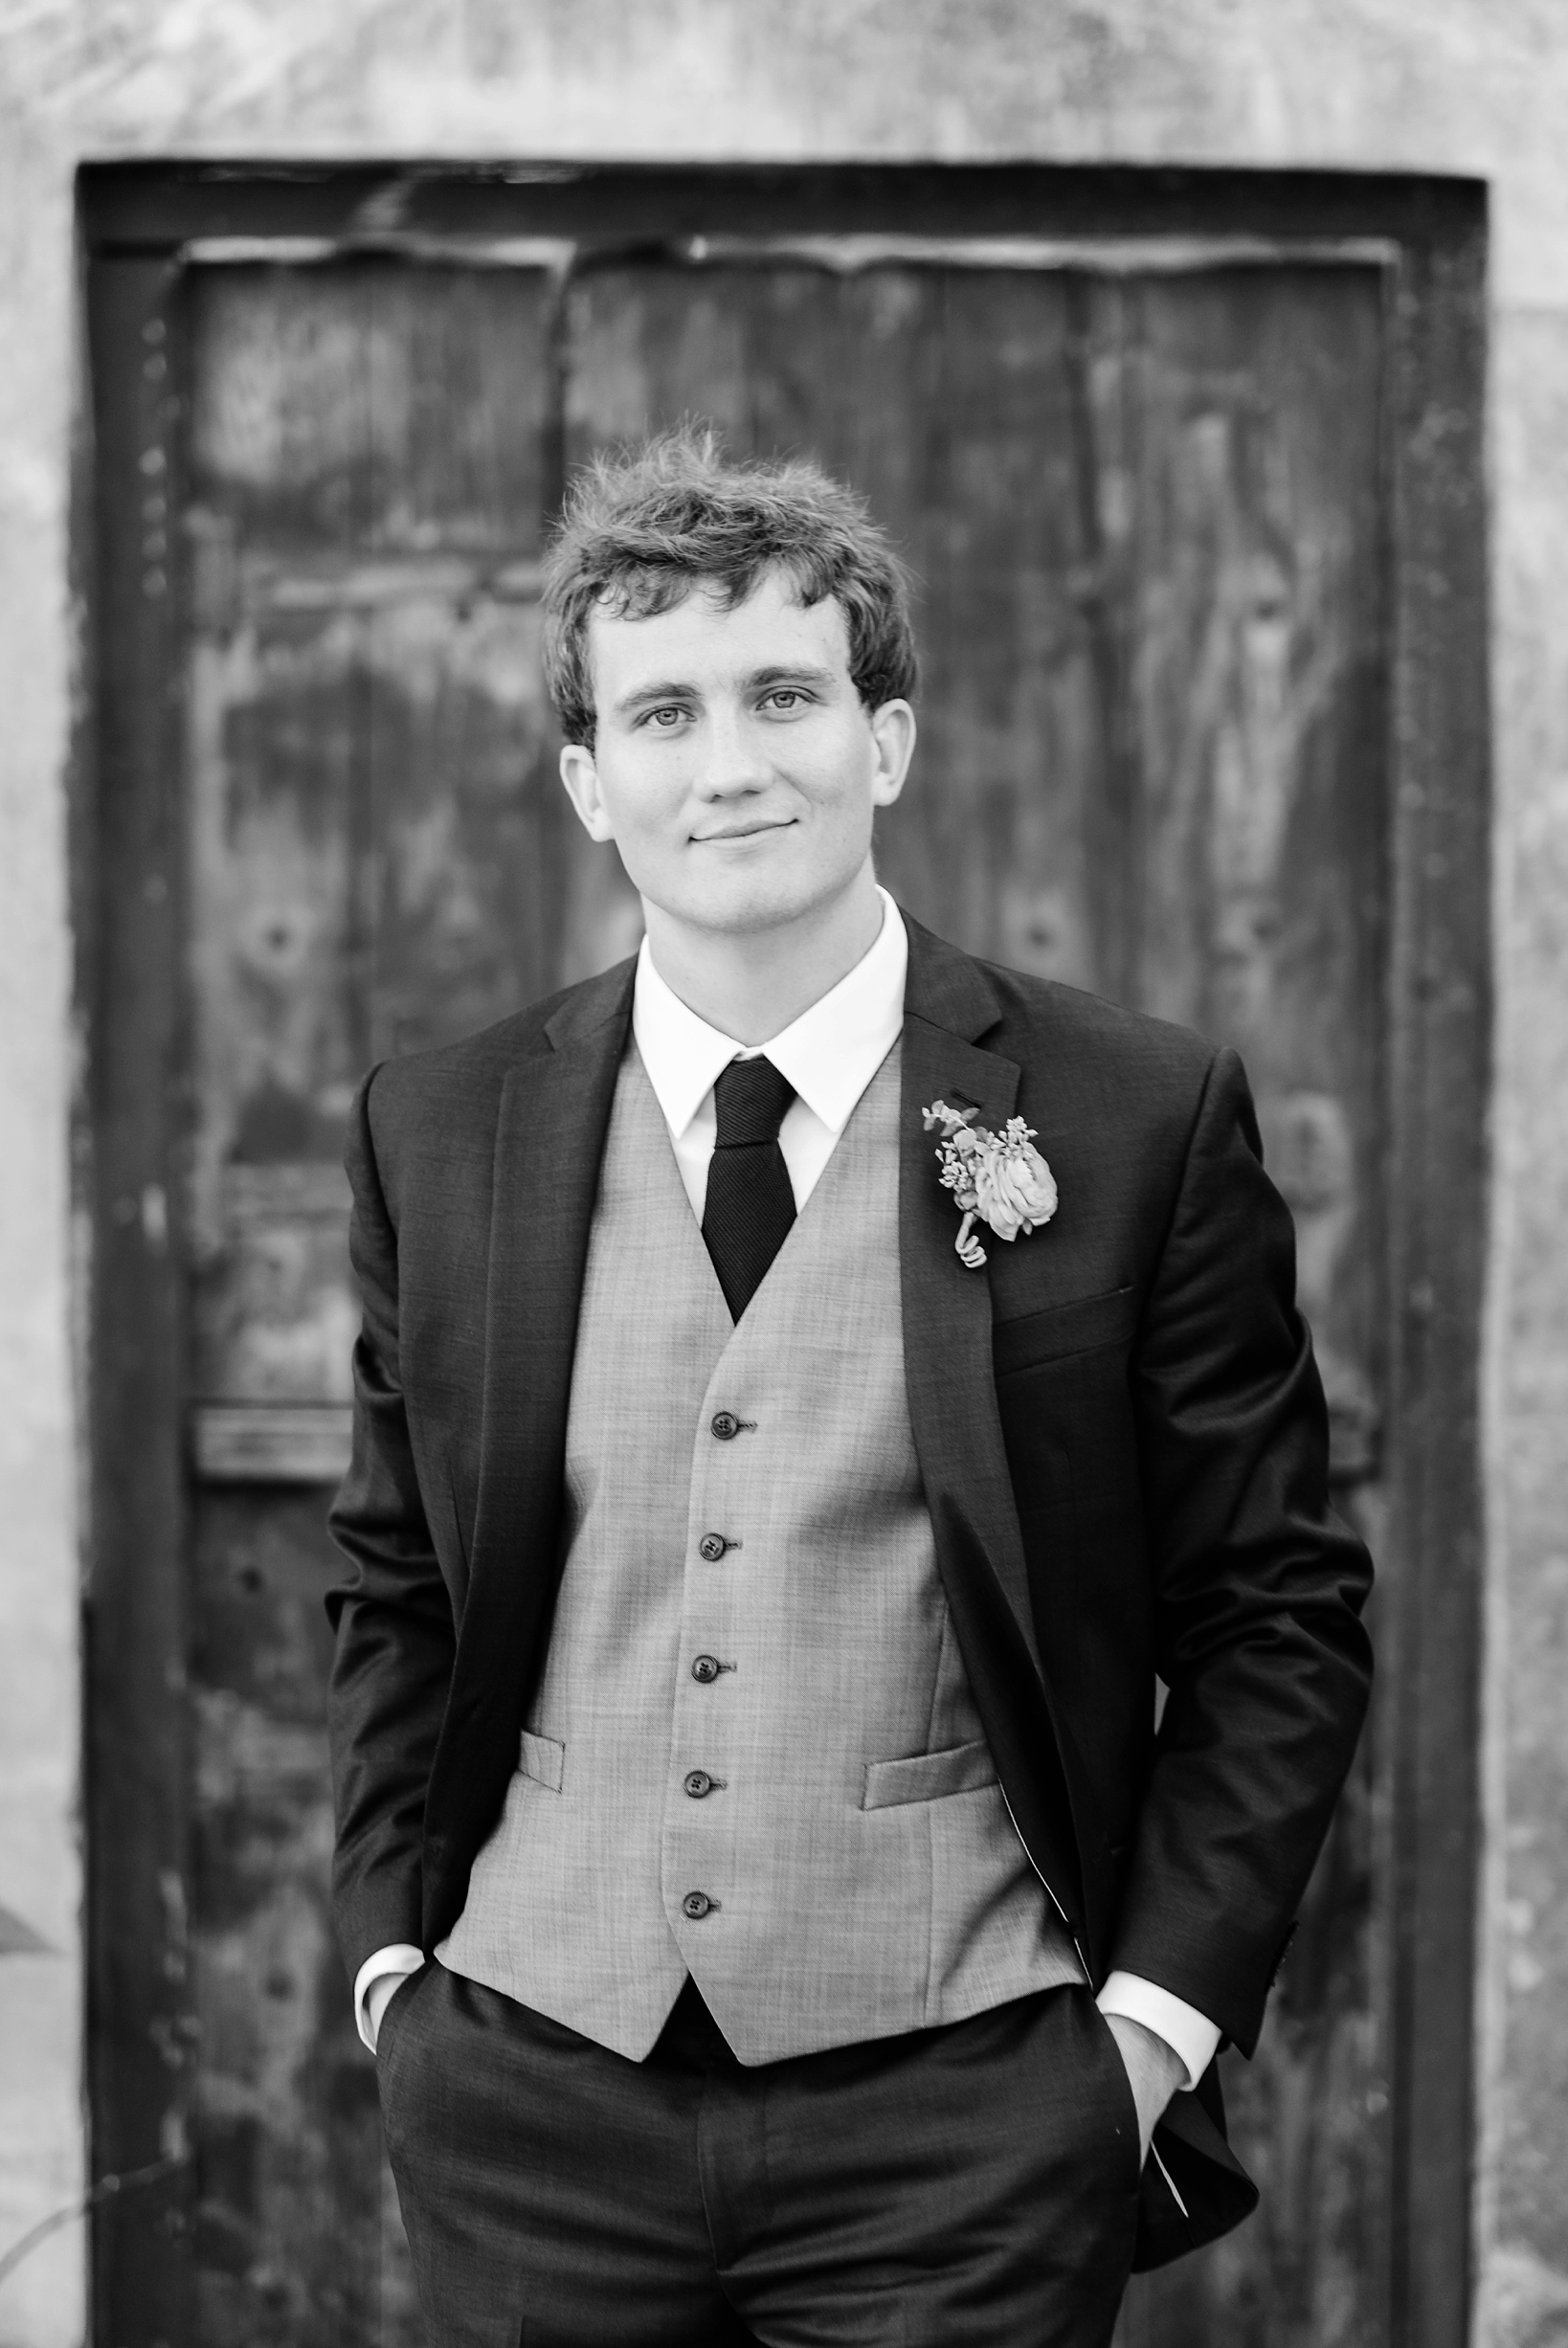 Portrait of the Groom in black and white